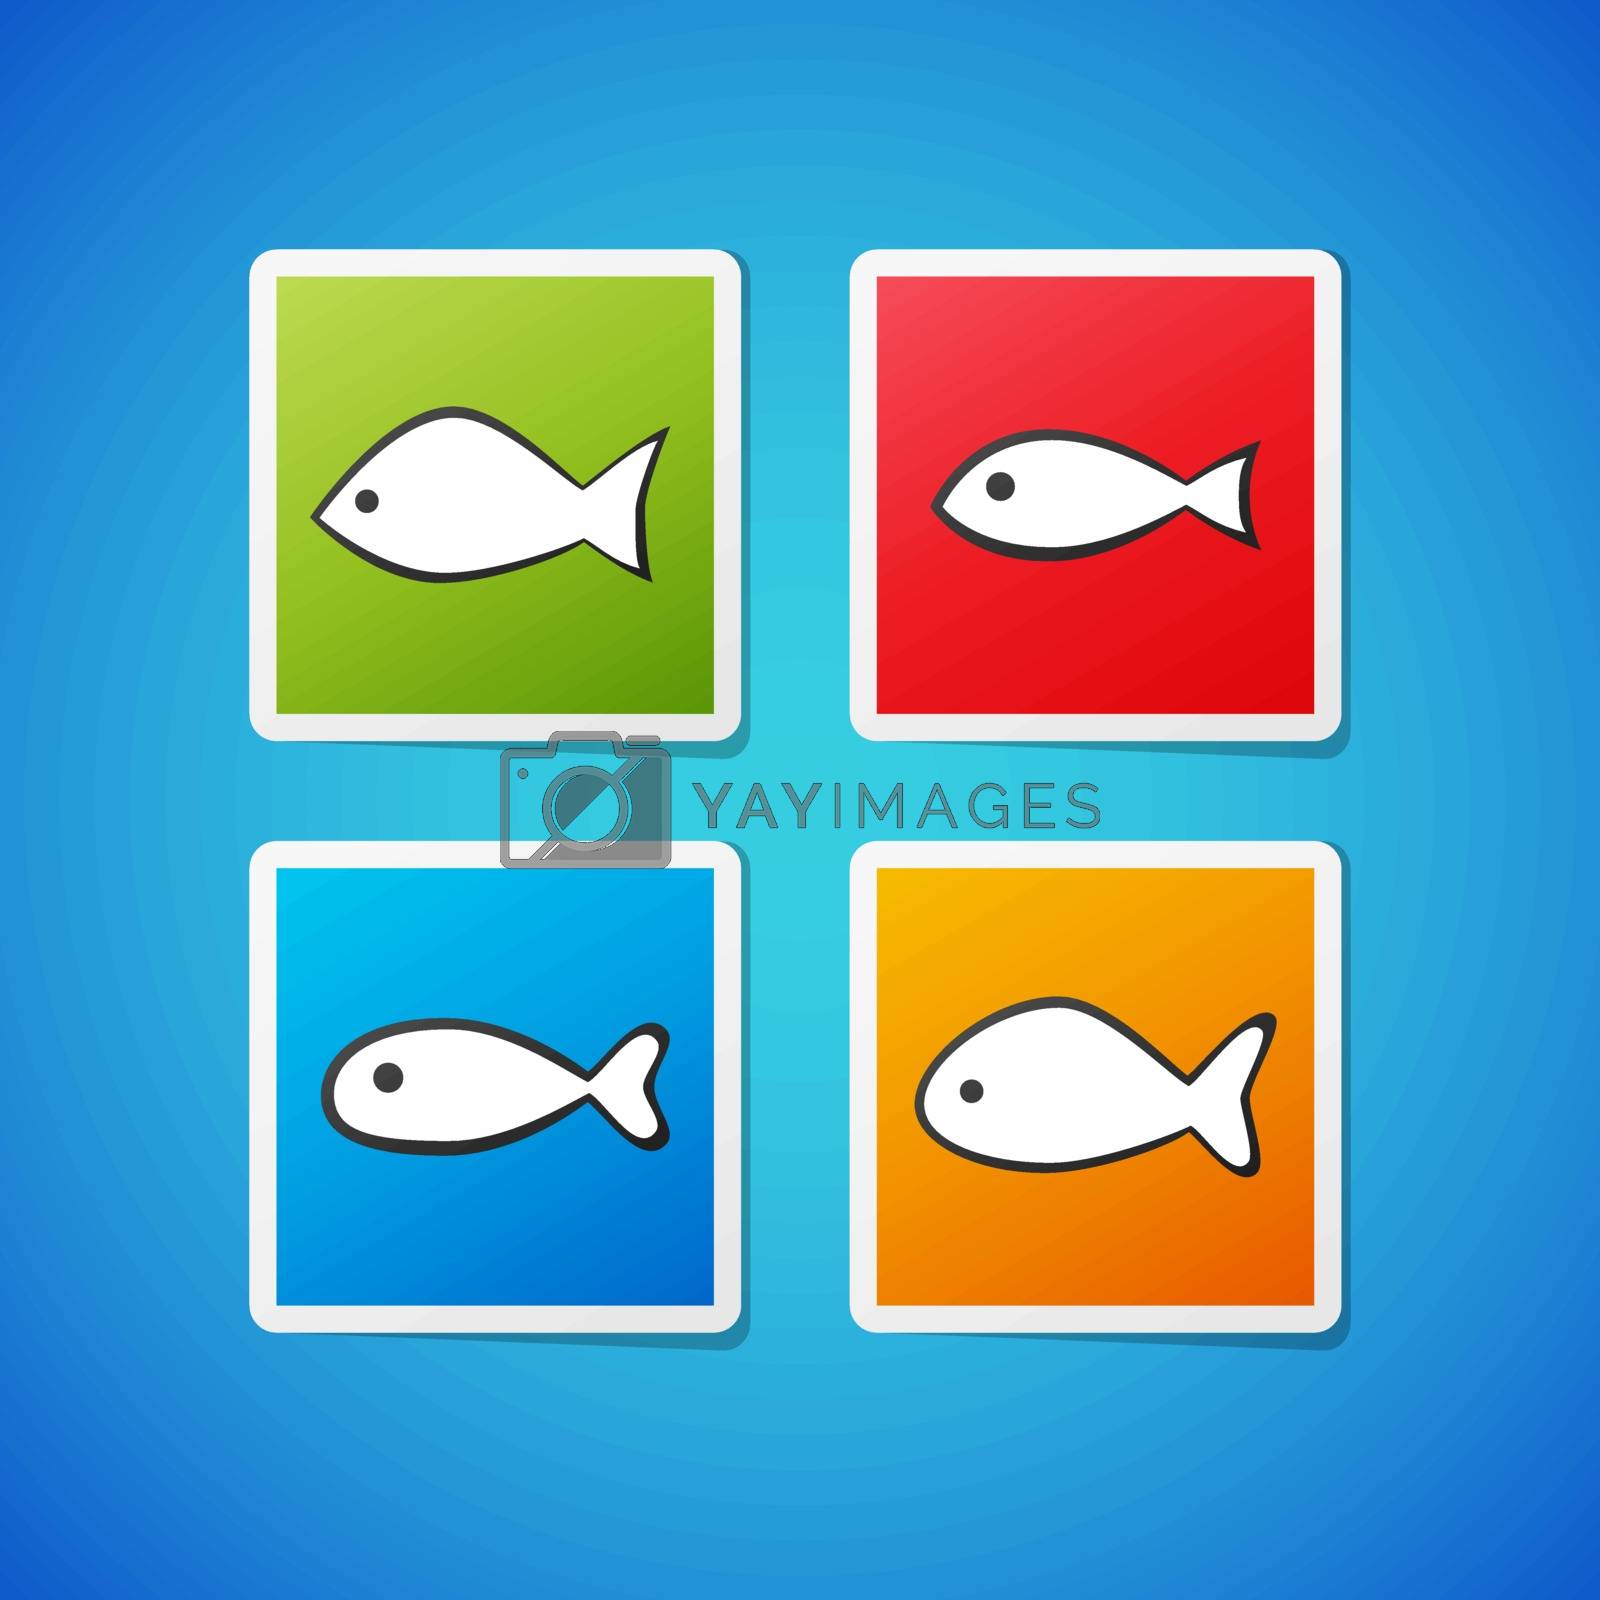 Royalty free image of Vector fish stickers by ggebl